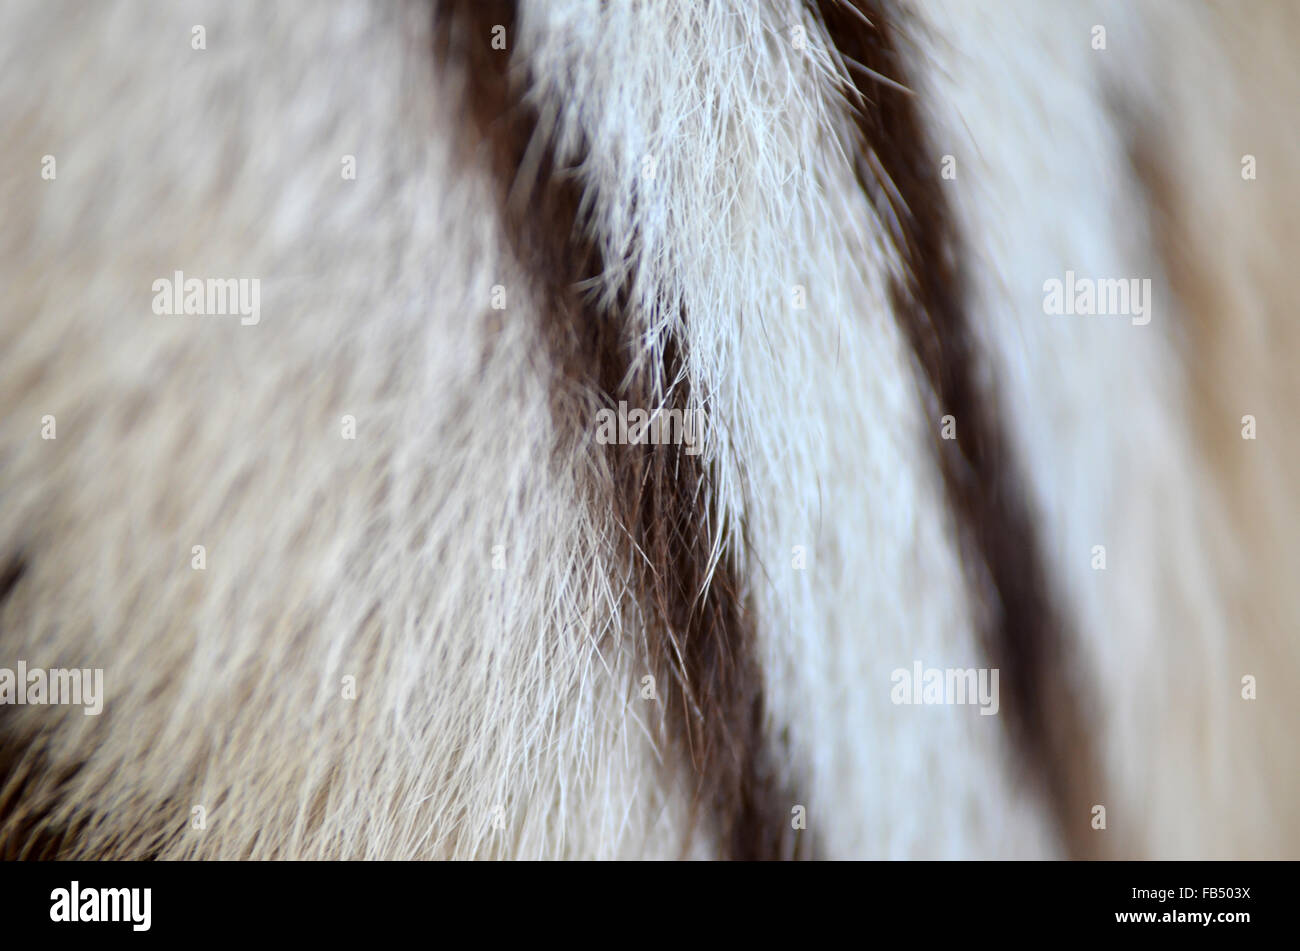 textured of real white bengal tiger fur Stock Photo